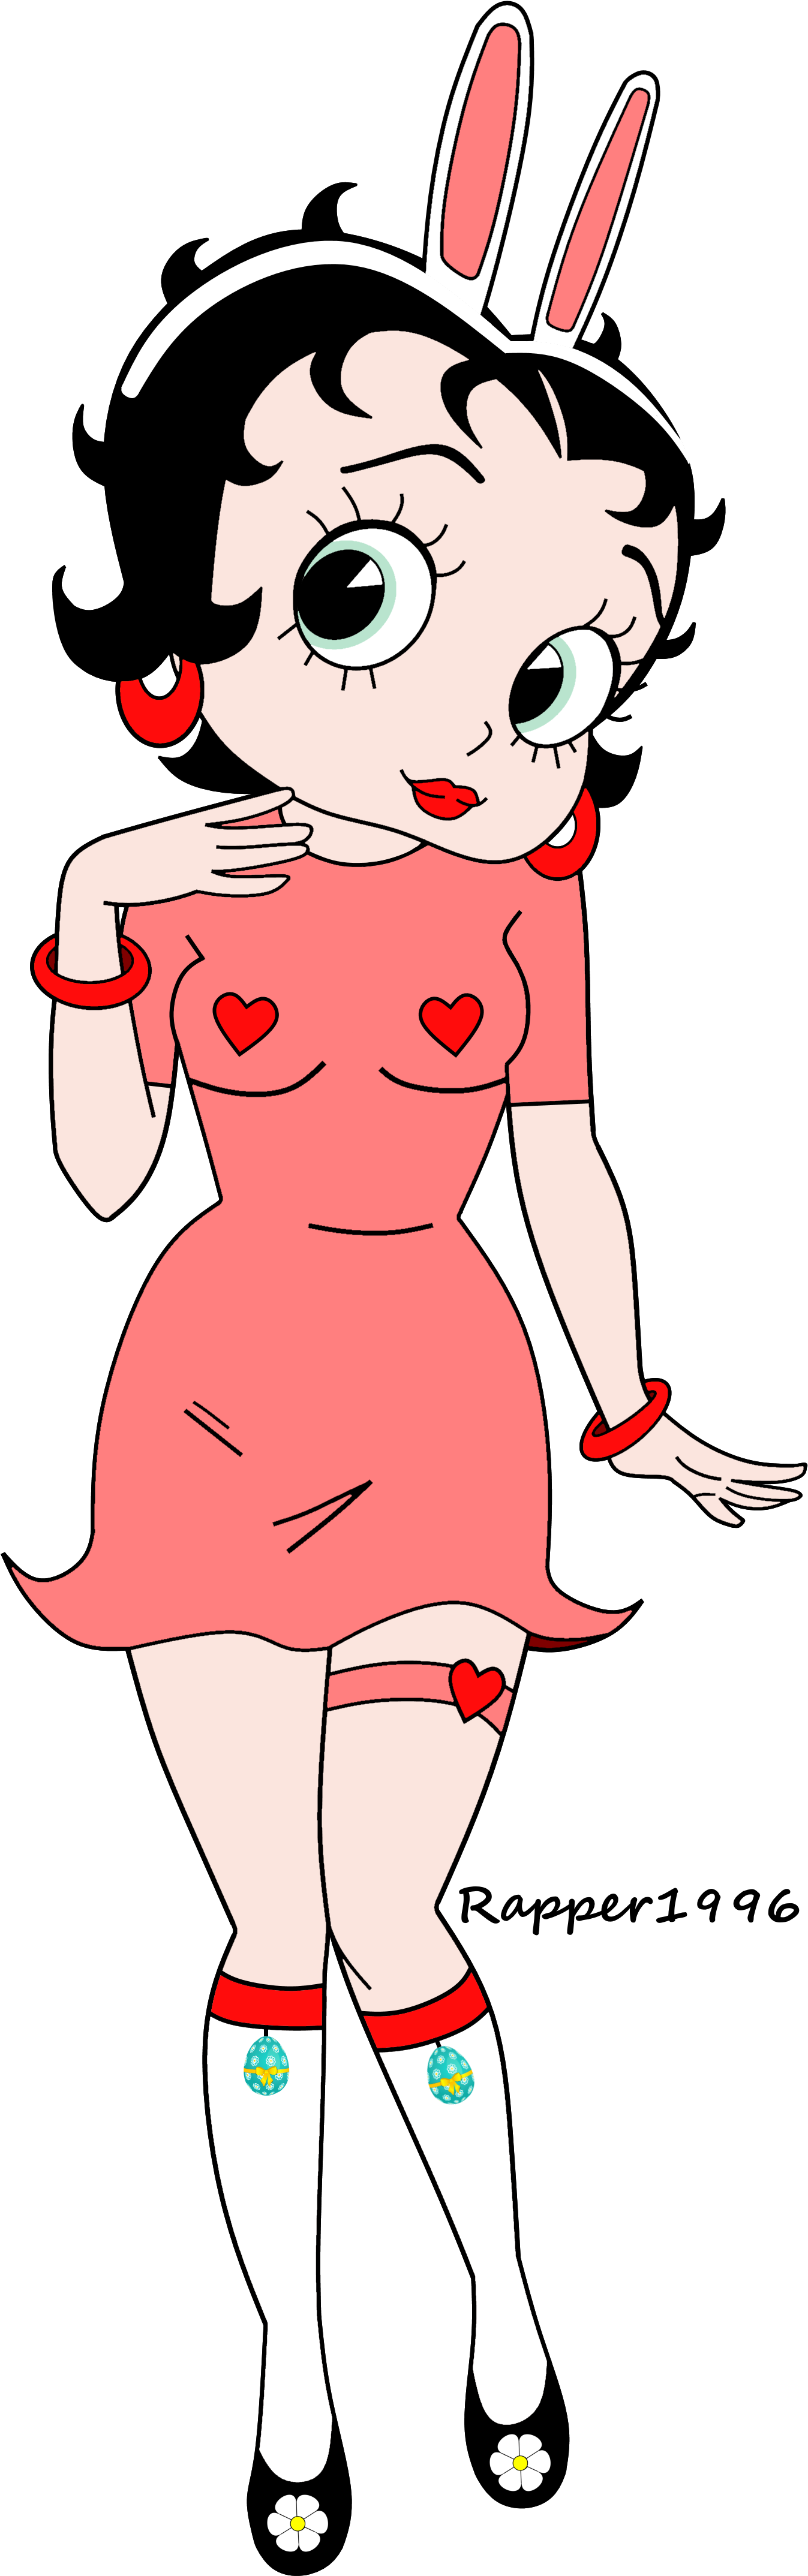 Betty Boop Anime Easter Render By Rapper1996 - Boop Anime Betty Boop (1358x4300)